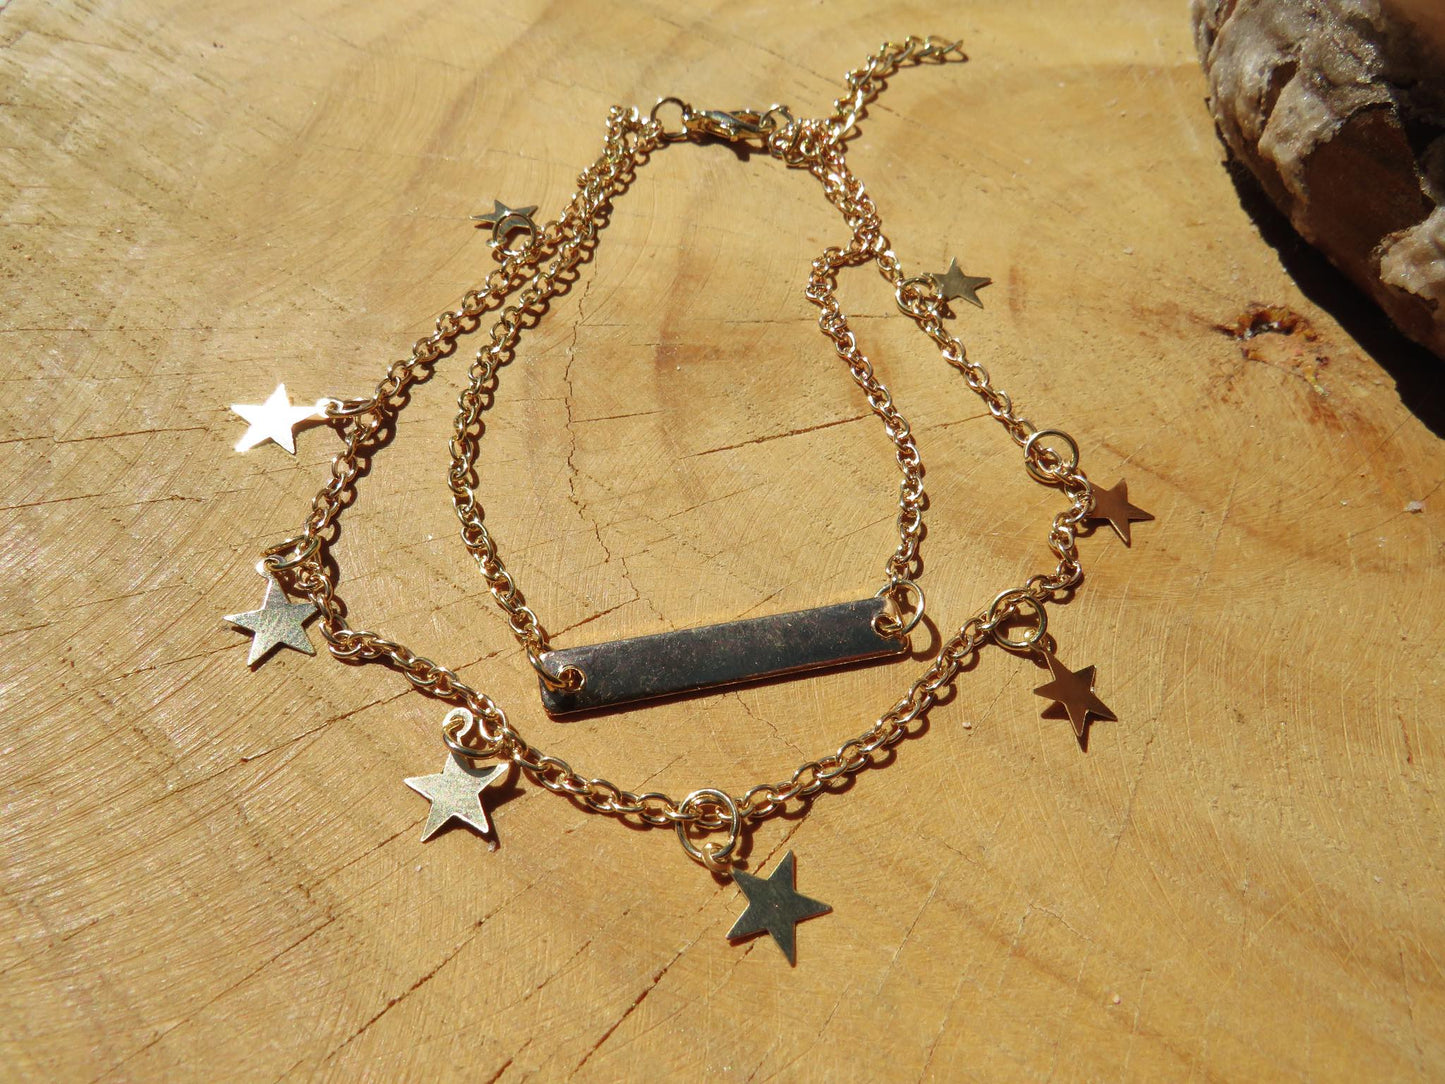 Double Chain Star Anklet